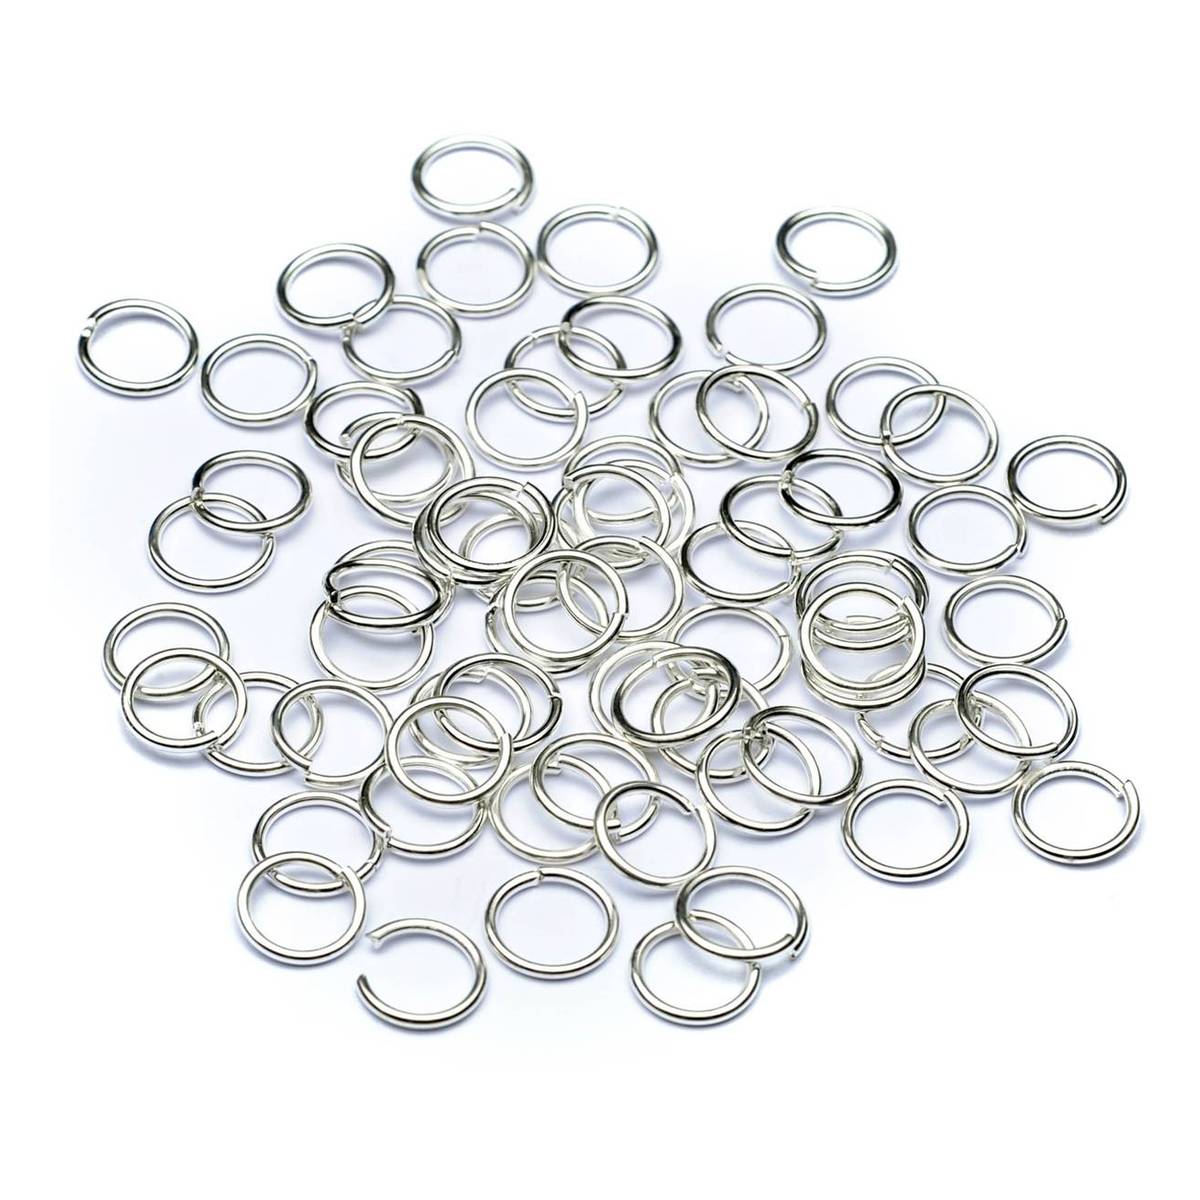 https://www.hobbycraft.co.uk/on/demandware.static/-/Sites-hobbycraft-uk-master/default/dw18b88439/images/large/561446_1000_1_-beads-unlimited-silver-plated-jump-rings-7mm-120-pack.jpg